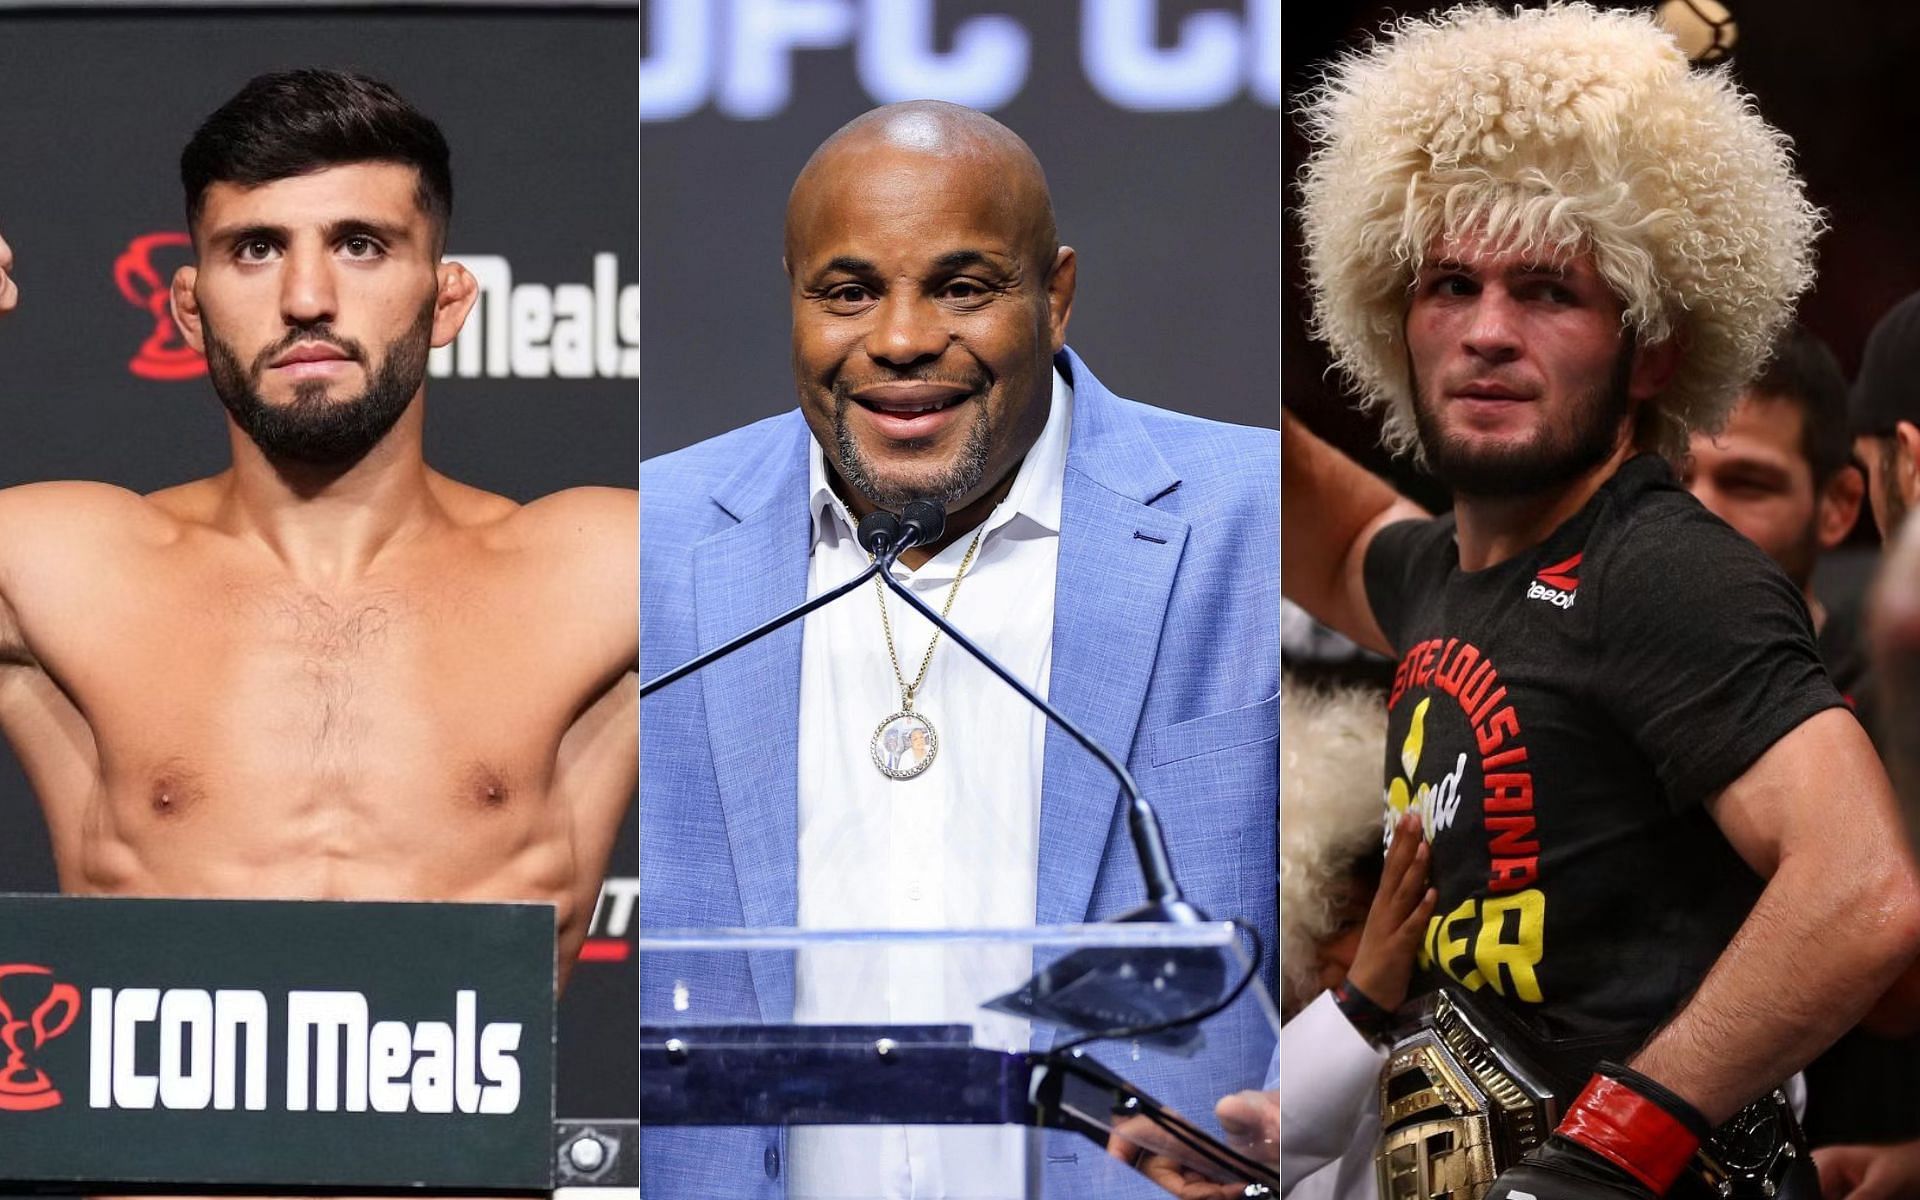 Daniel Cormier (middle) speaks about Arman Tsarukyan (left) and Khabib Nurmagomedov (right) [Images via Getty]